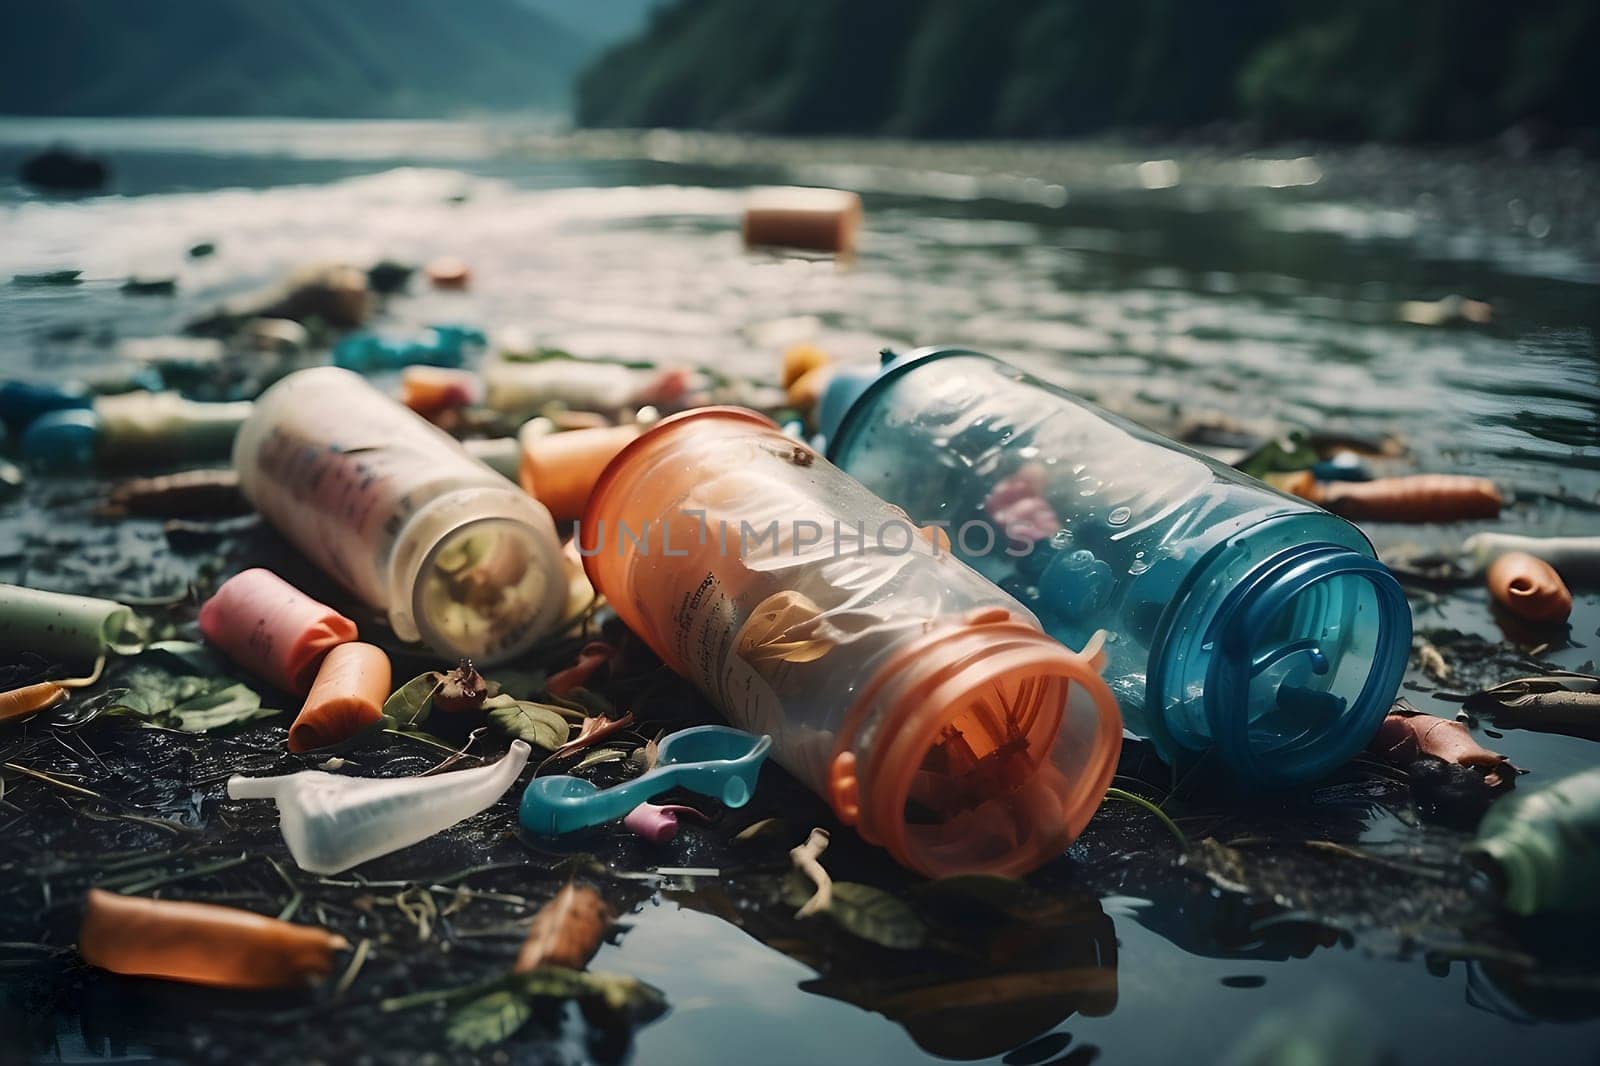 Plastic oceans. Overcoming the water pollution crisis.